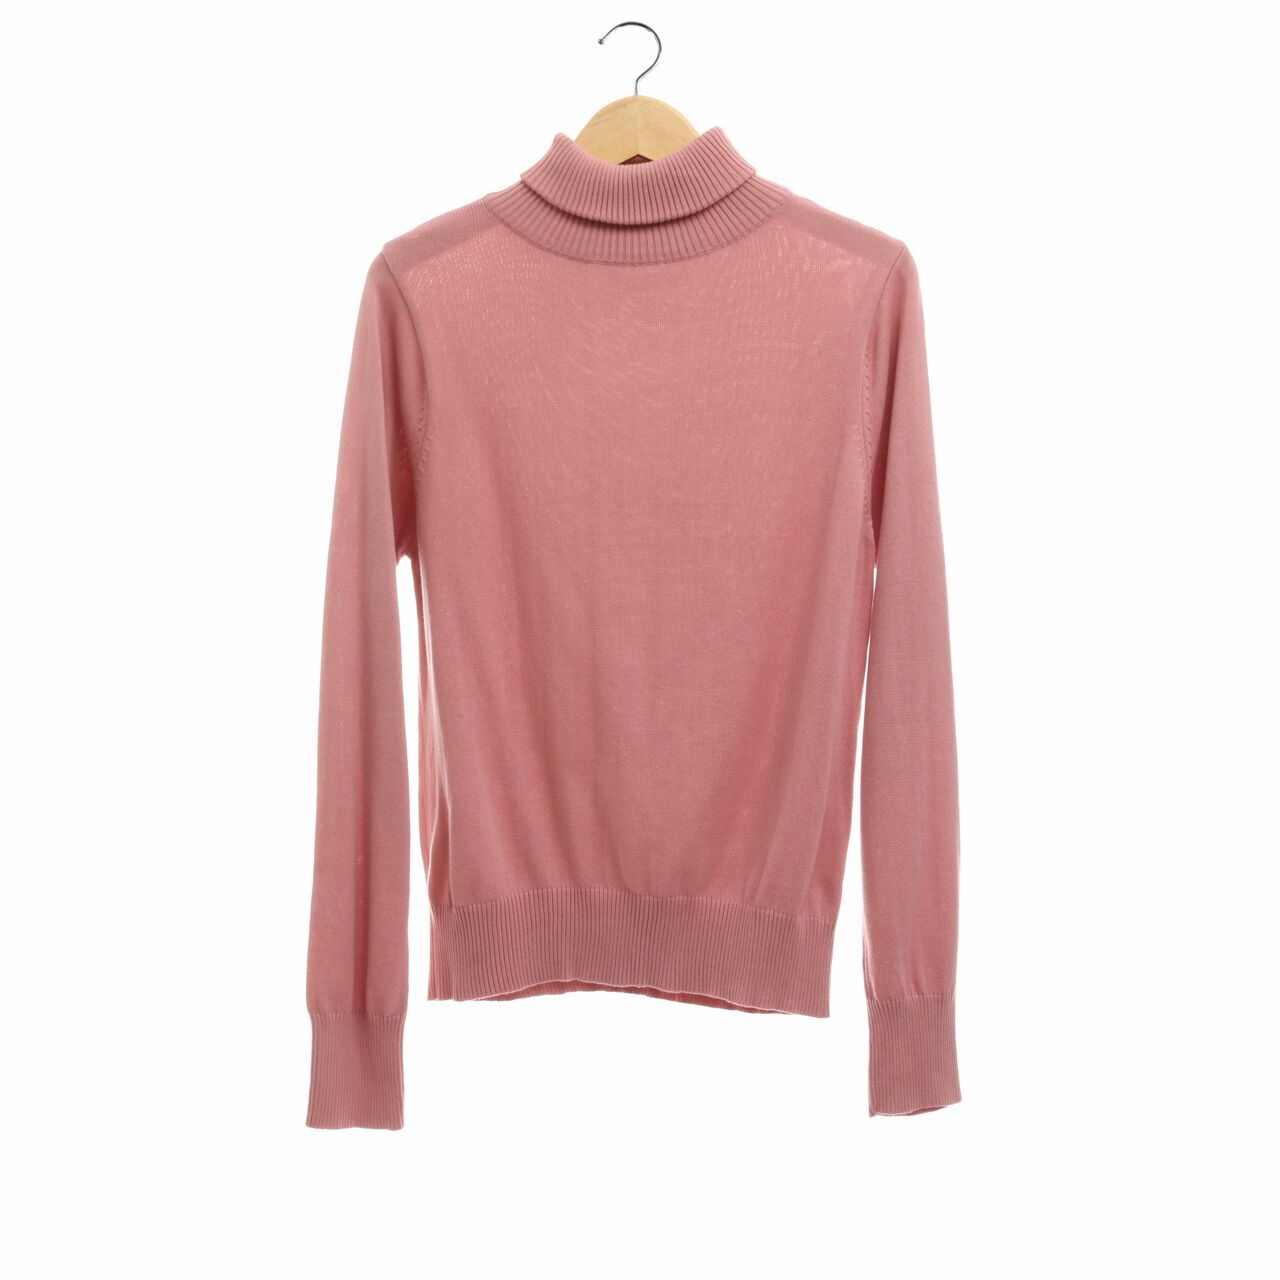 ATS The Label Pink Turtle Neck Sweater